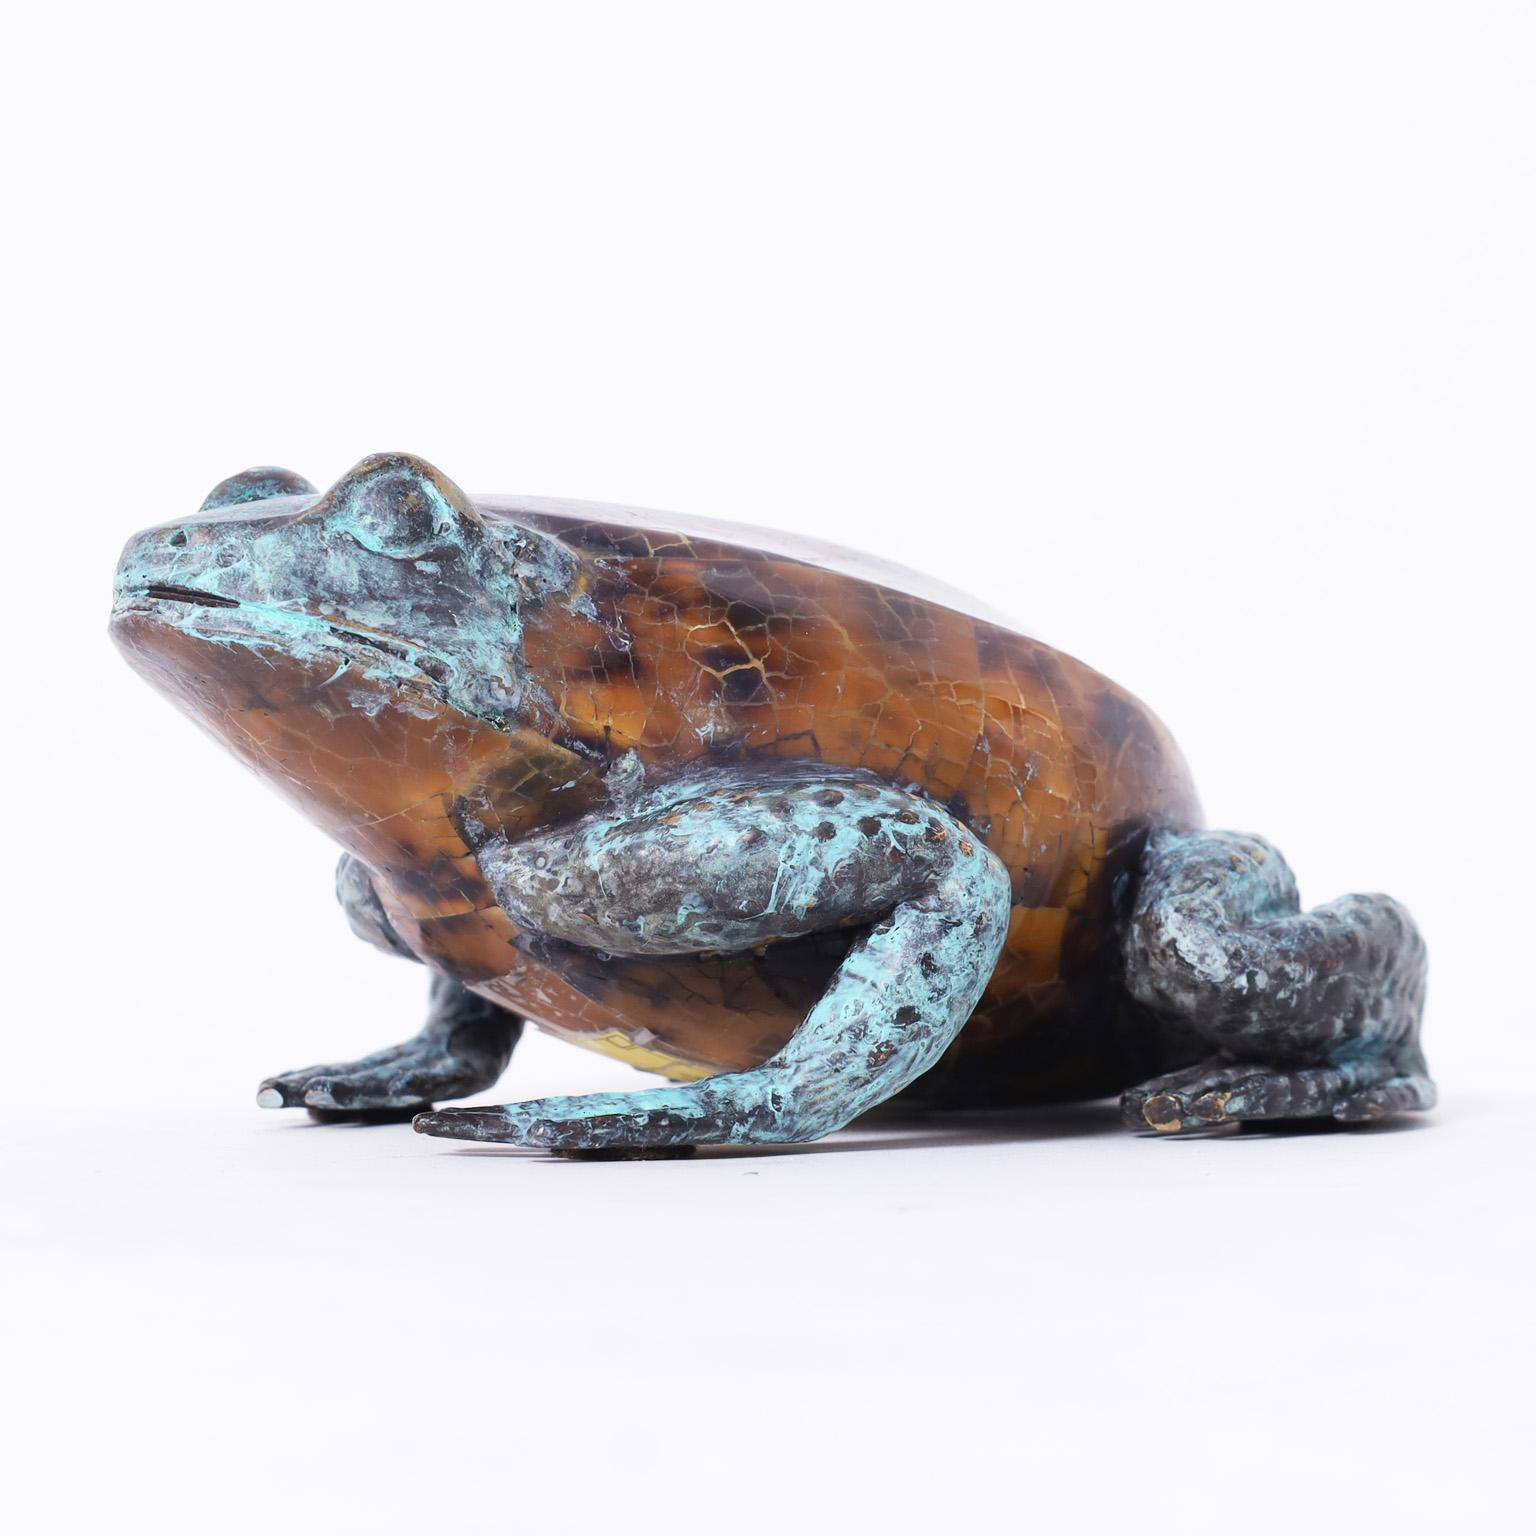 Mid century life size frog crafted in cast bronze with a lush verdigris finish and featuring a tortoise shell body. Signed Maitland-Smith on the bottom.